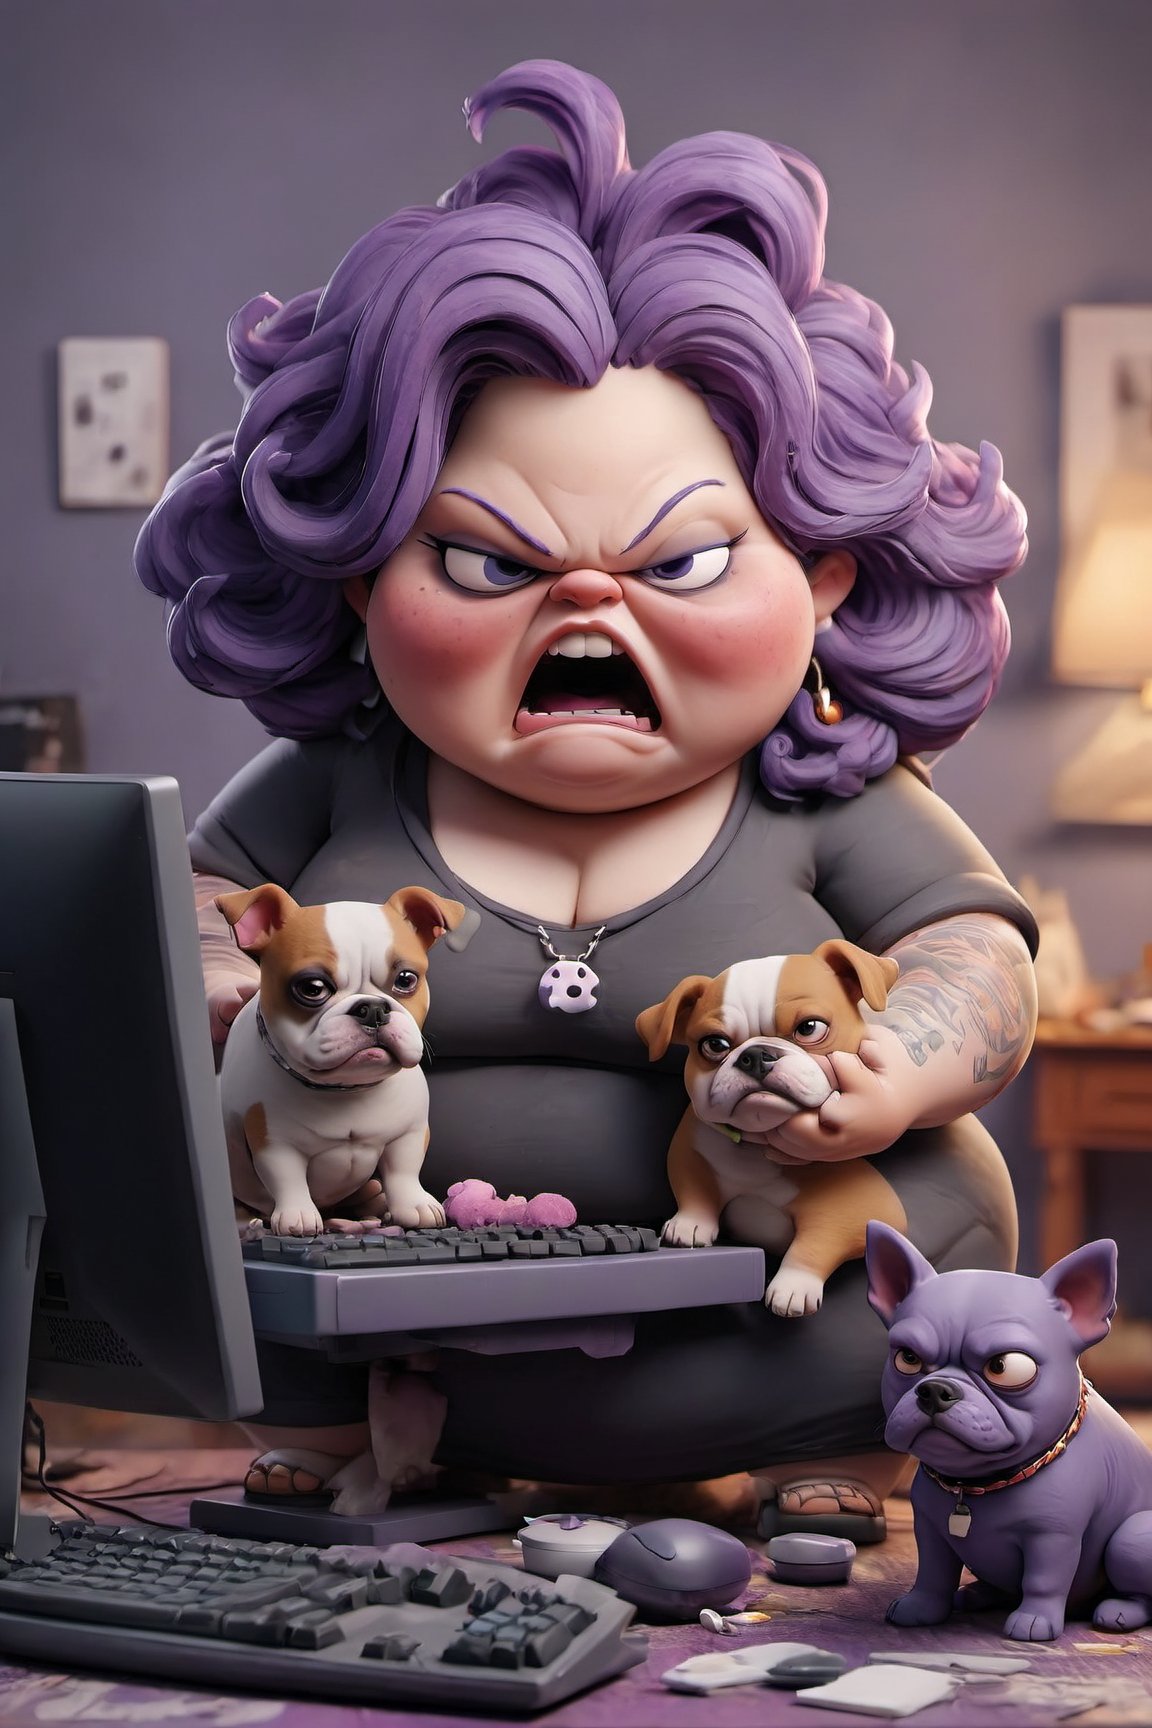 high quality
obese woman
ugly purple hair
with dogs
rabid

in a room with a computer